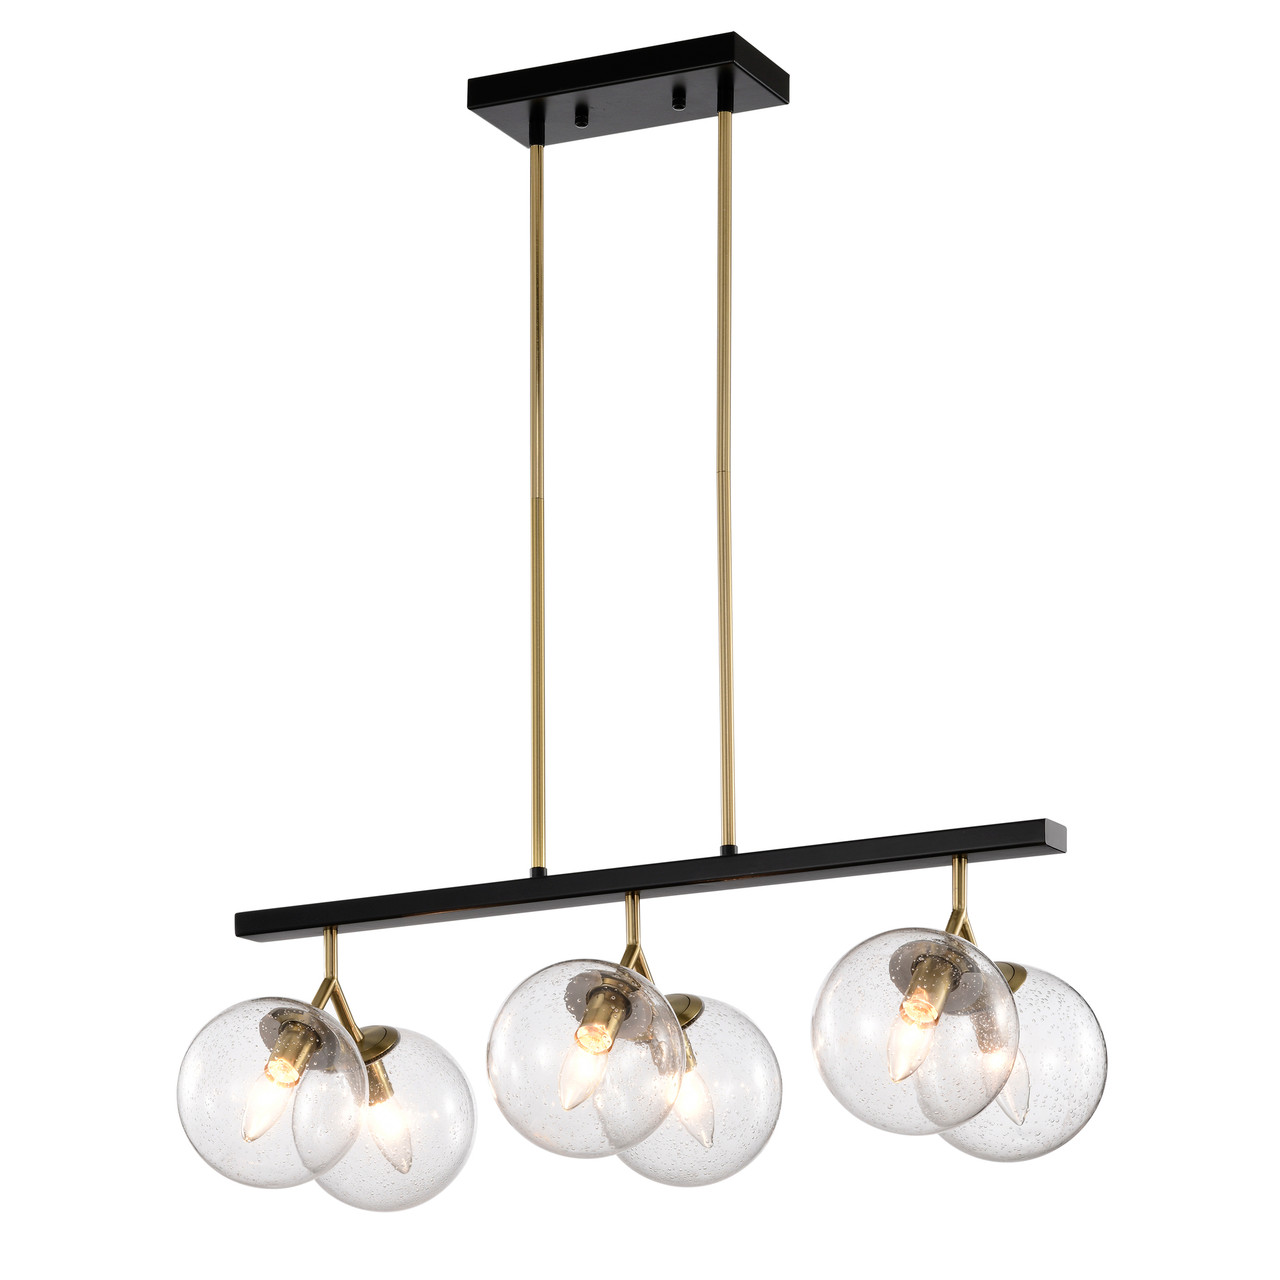 WAREHOUSE OF TIFFANY'S GD01-50BB Maxwell 28.3 in. 6-Light Indoor Matte Black and Brass Finish Chandelier with Light Kit